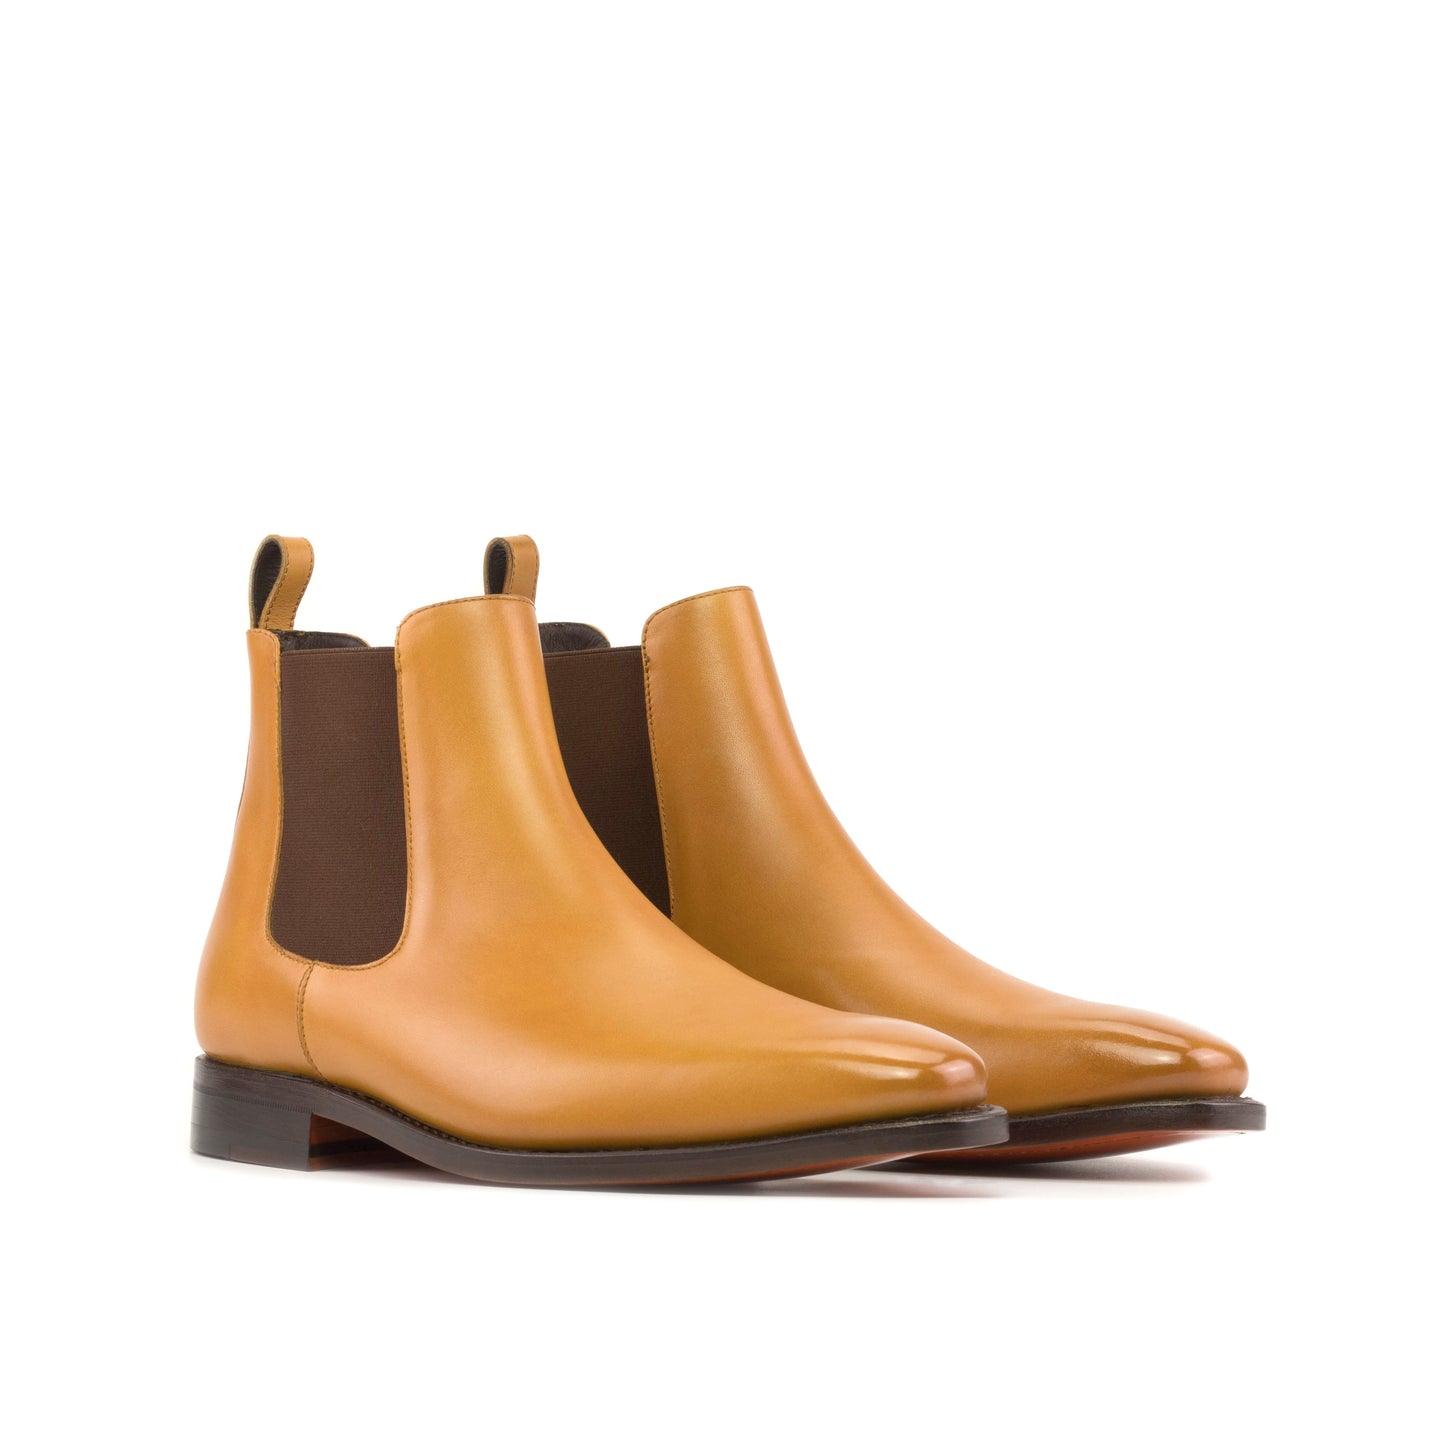 Chelsea Boots - orange Goodyear Welt leather sole